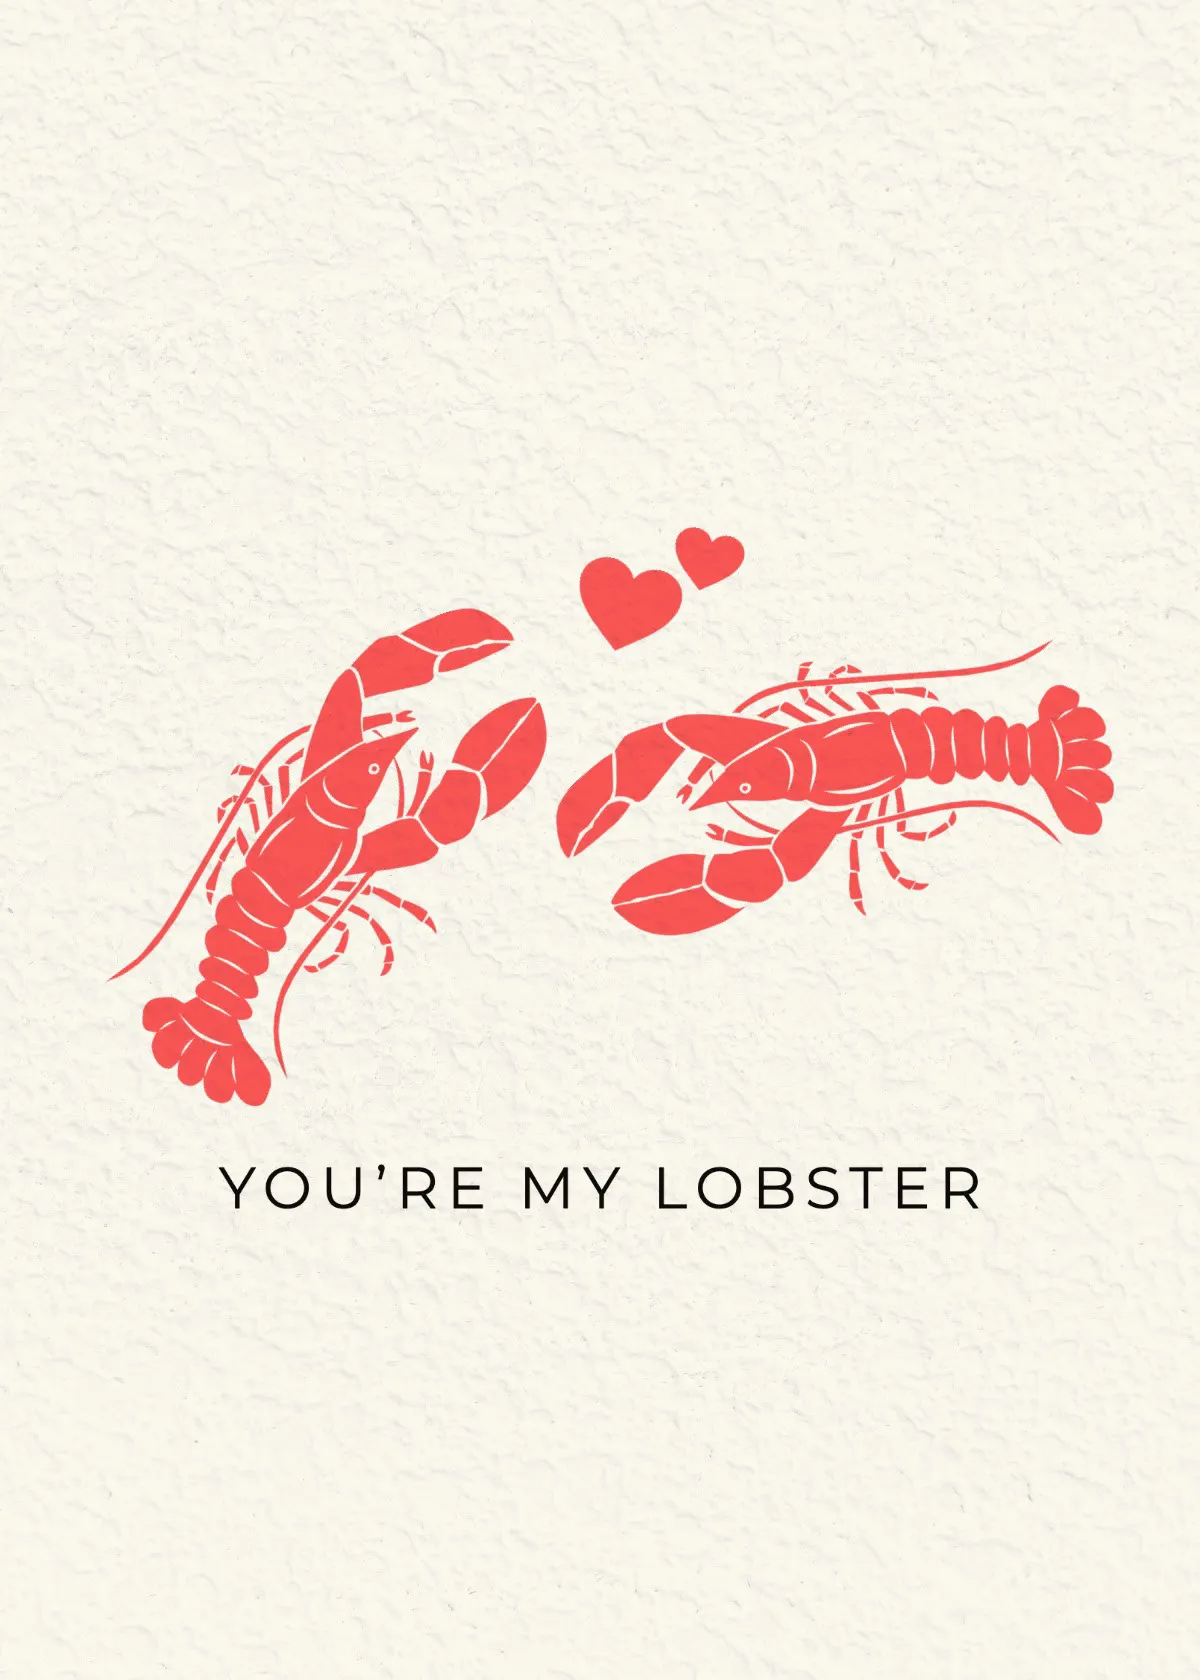 You're My Lobster Love Relationship Greeting Card